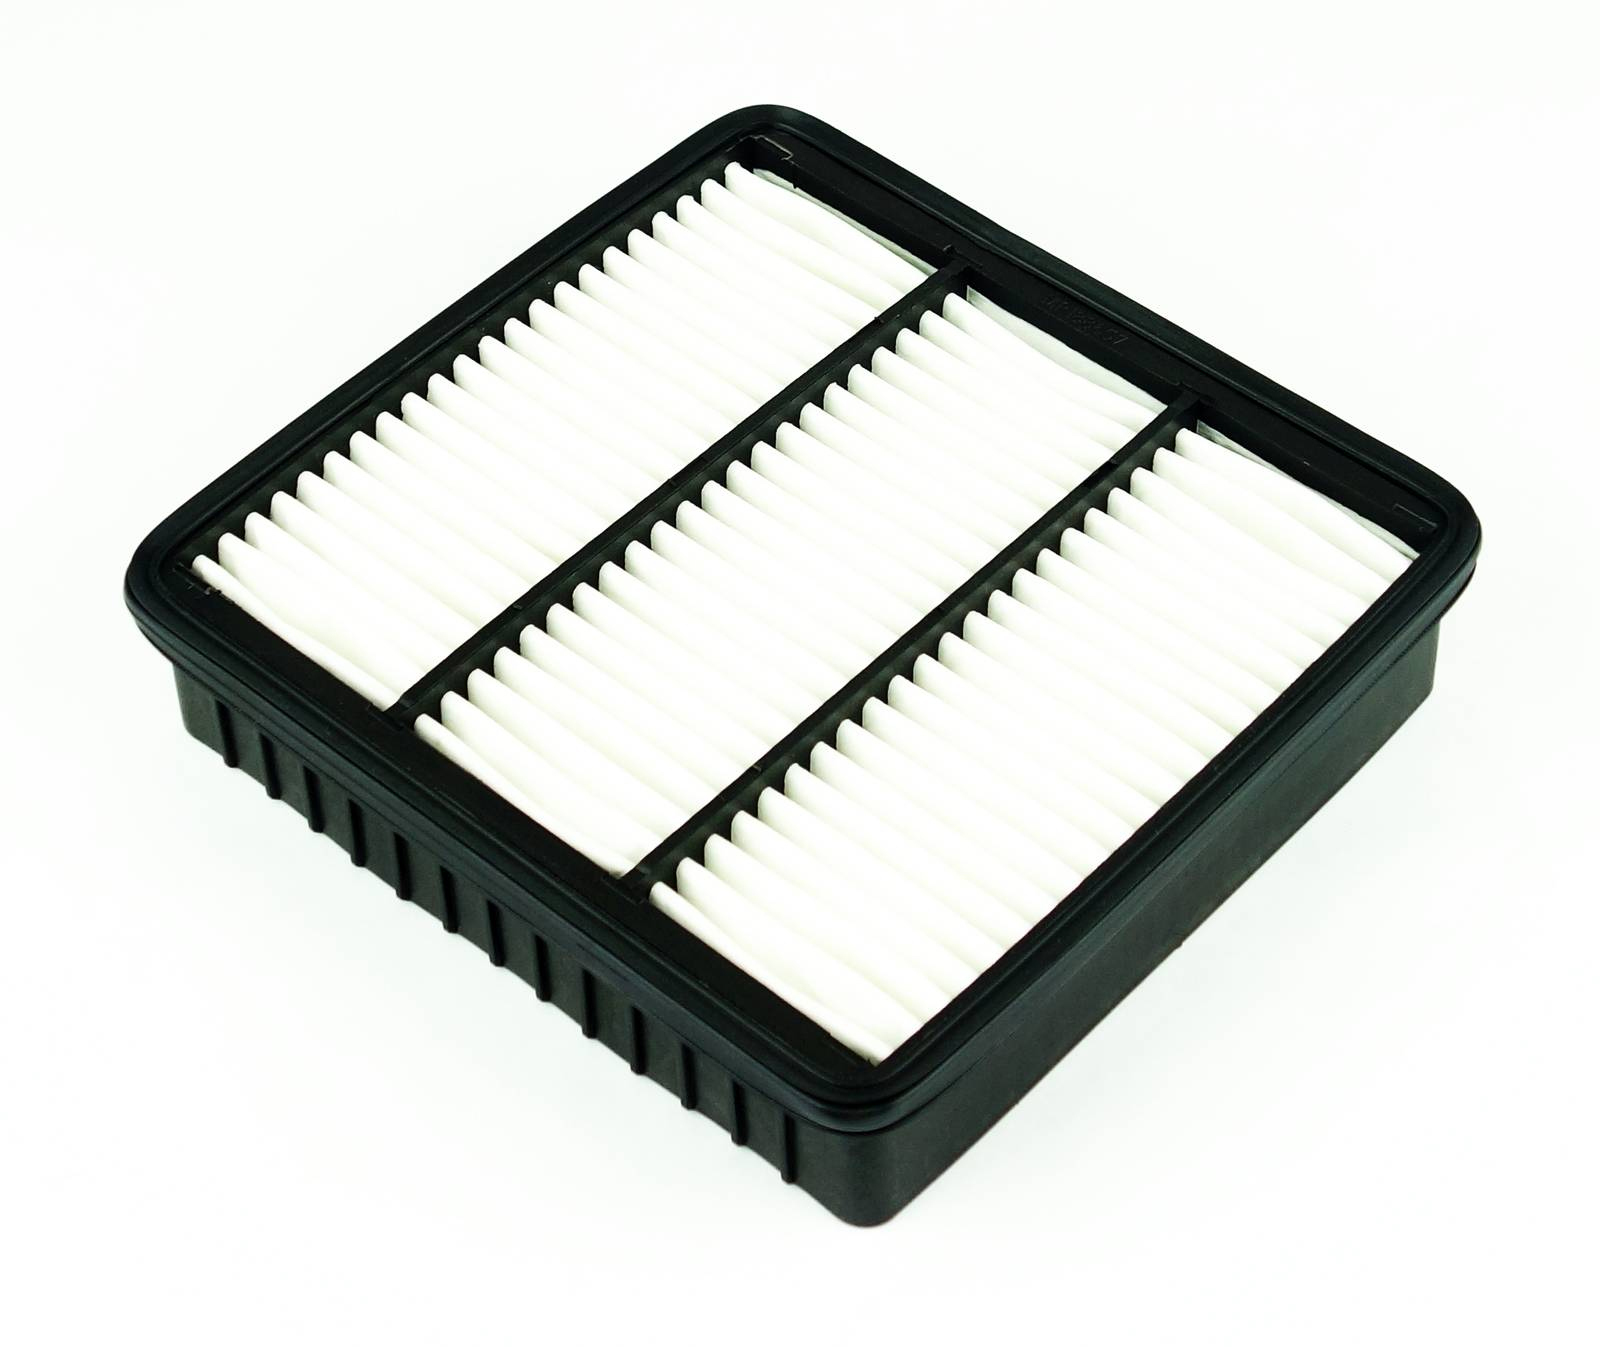 Air Filter to suit Mitsubishi Outlander 2.4L 01/0309/06